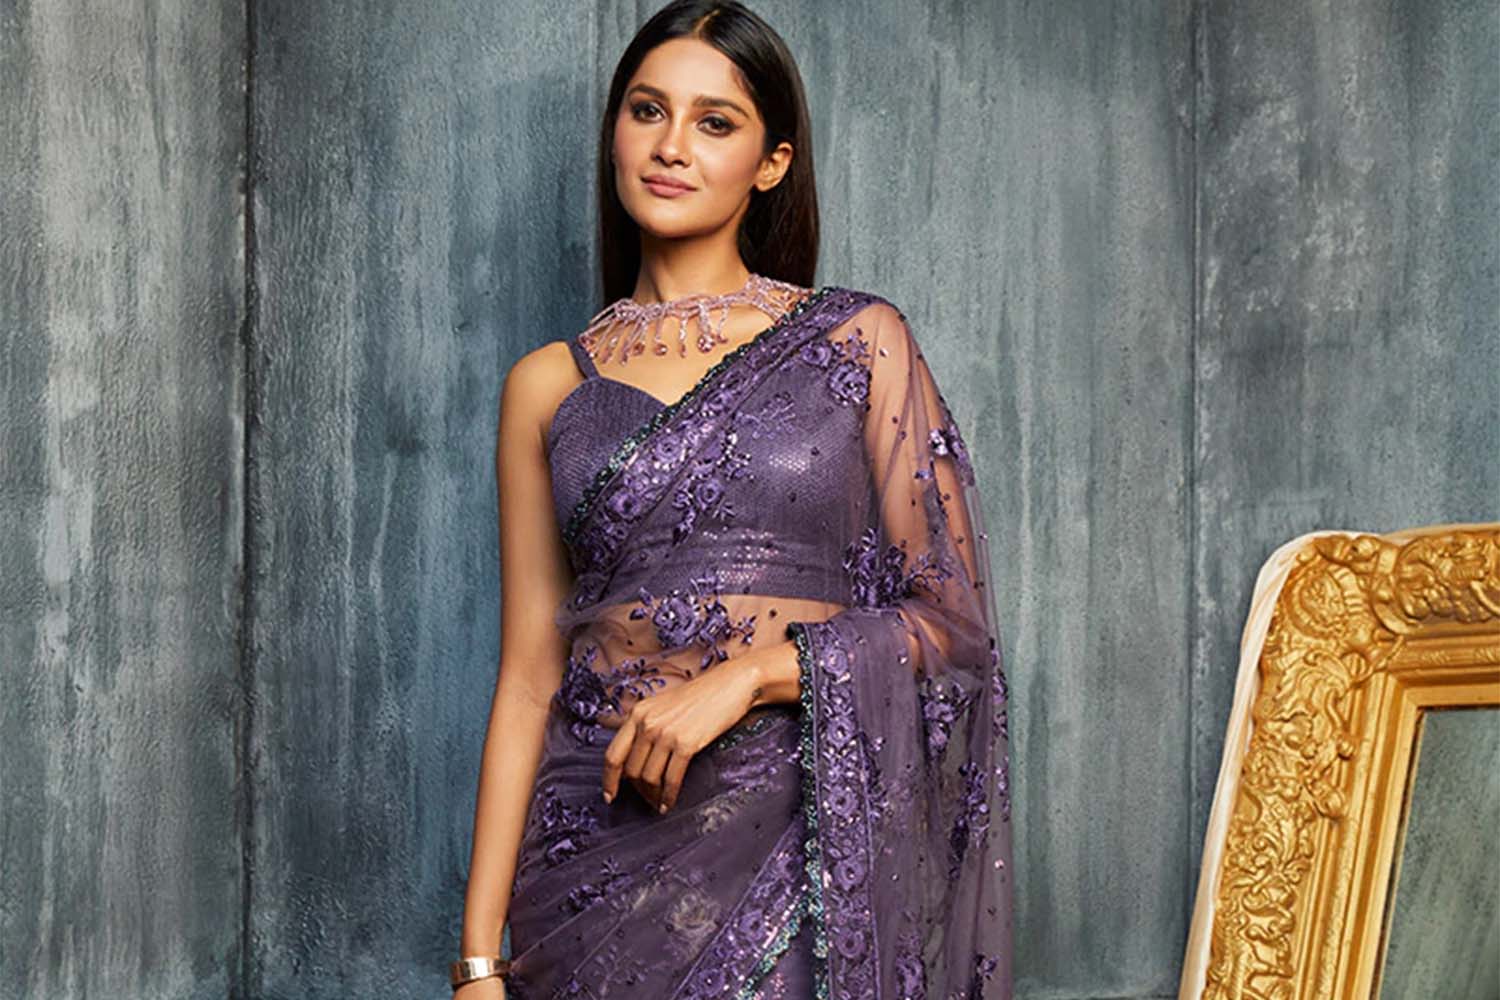 18 Trendy Saree Draping Styles for Your Special Occasion